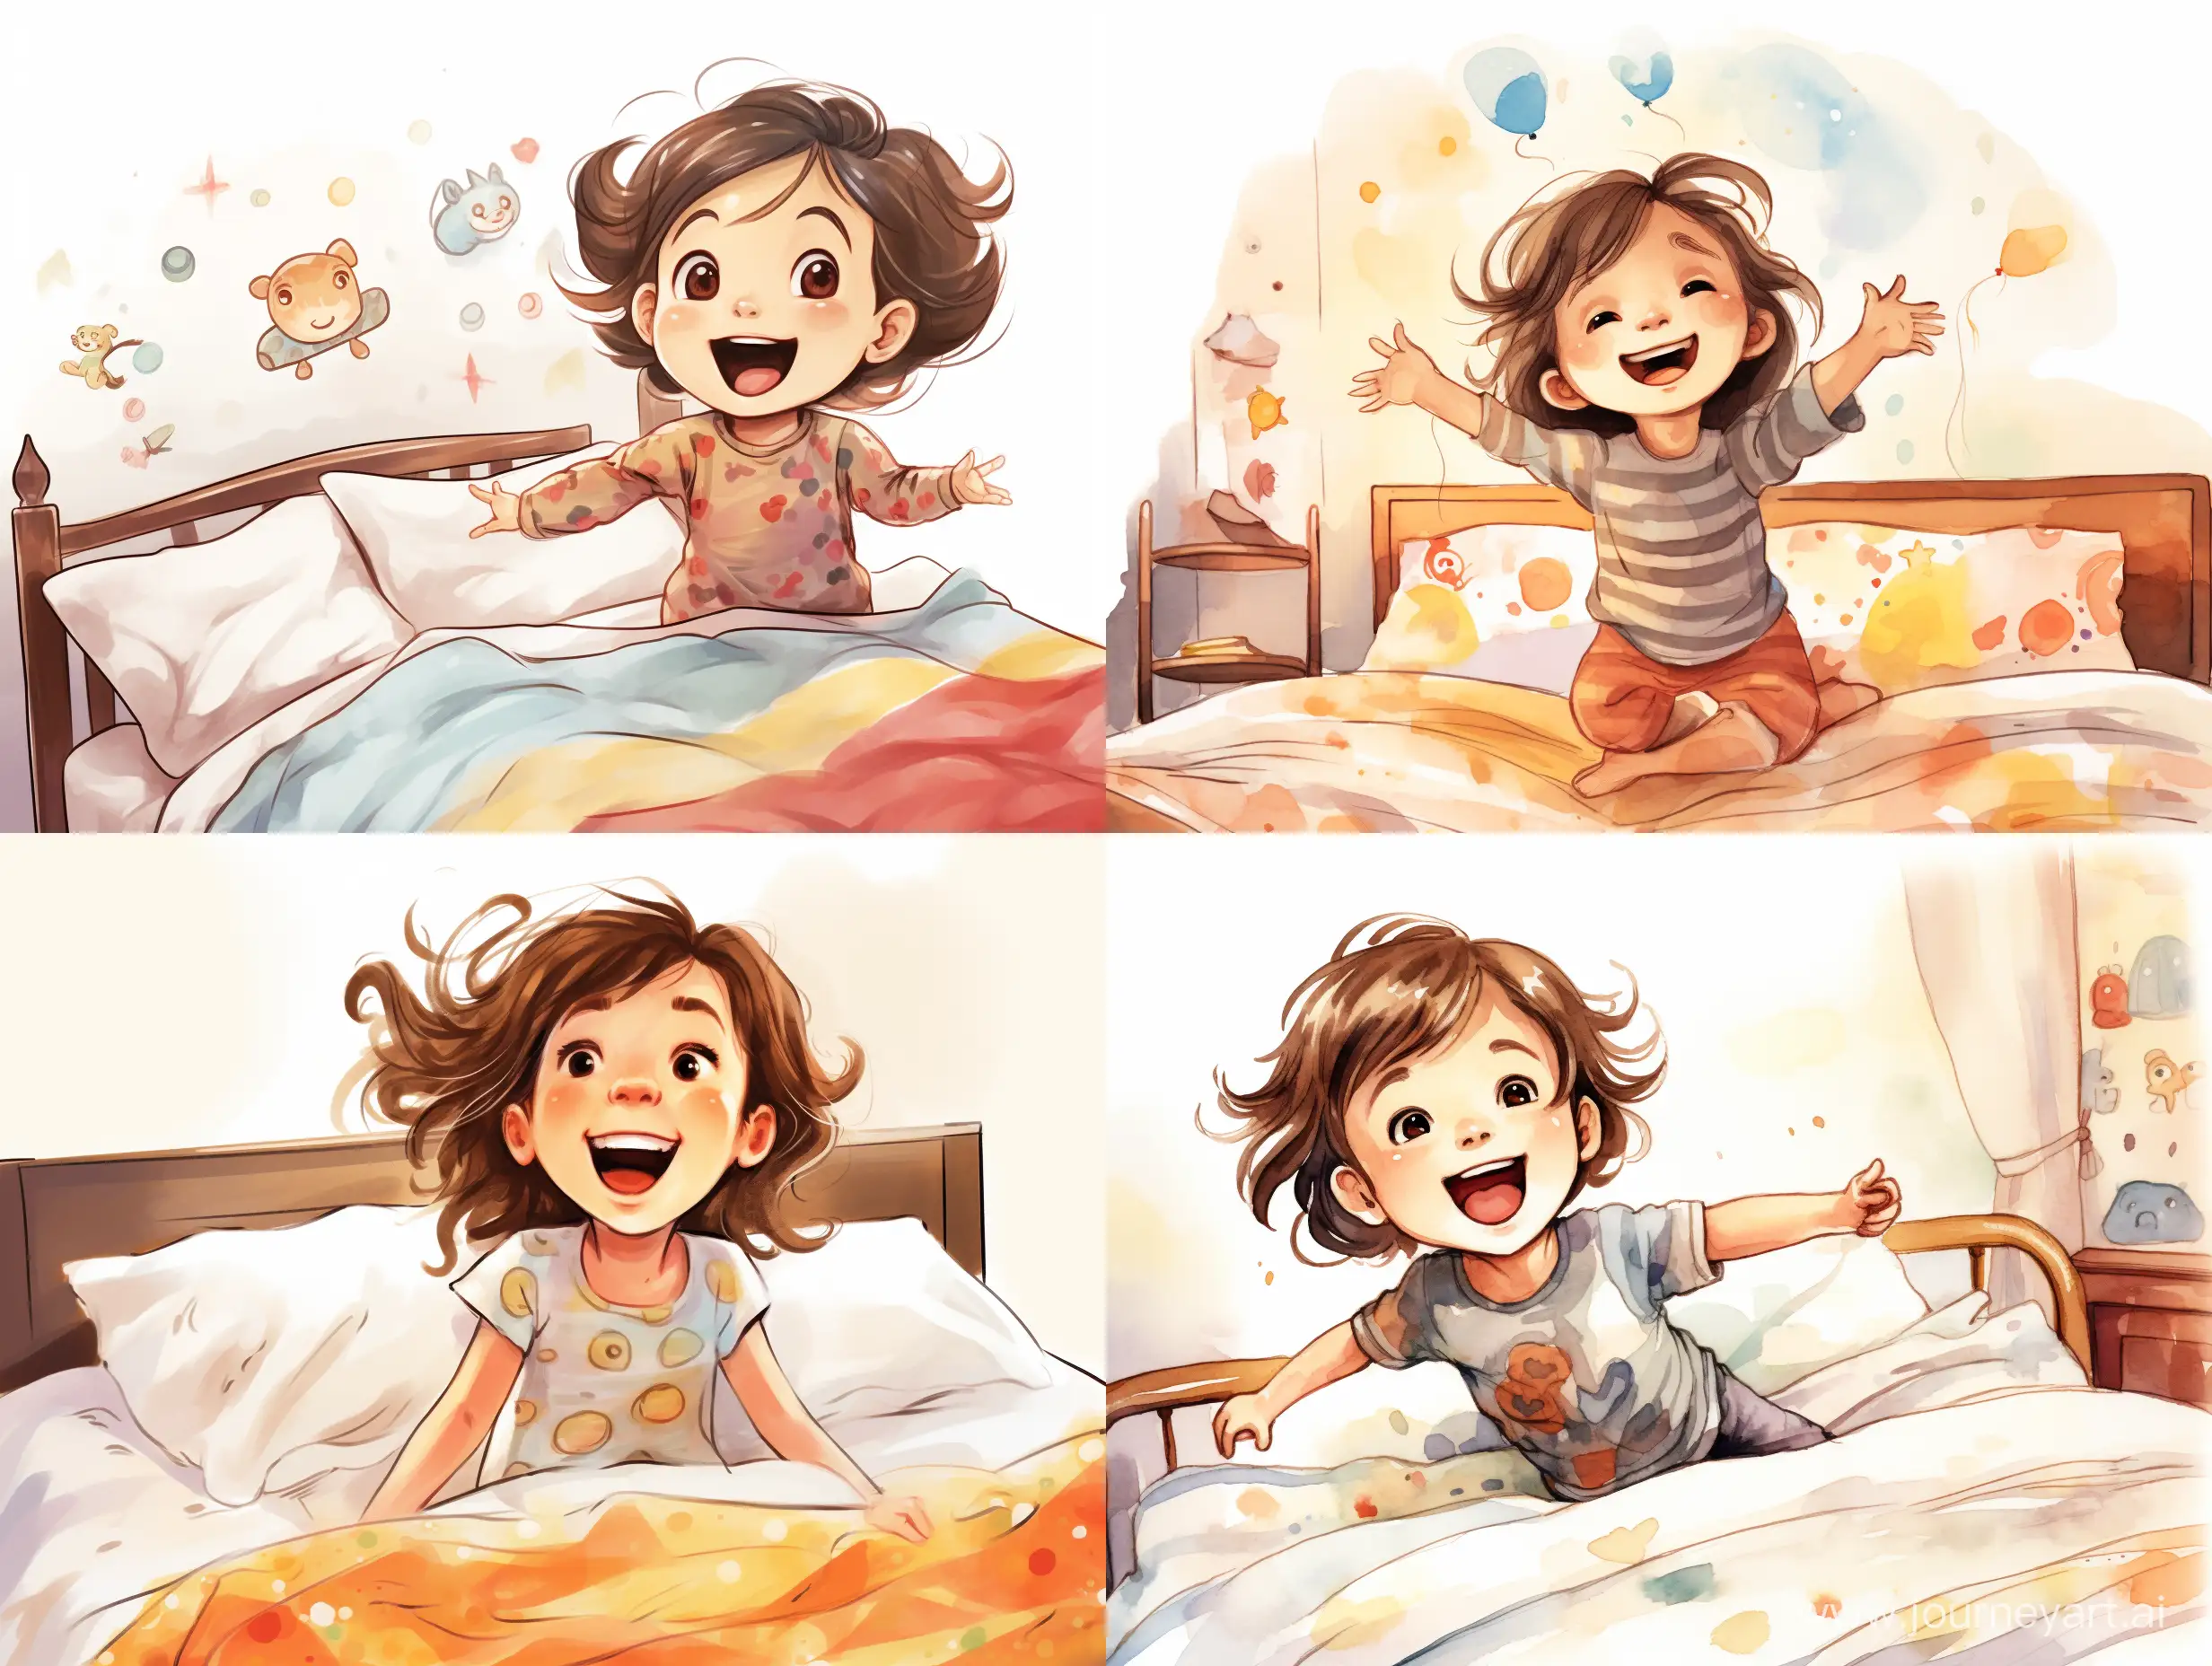 Joyful-Toddler-Jumping-on-Bed-Whimsical-Illustration-in-Victor-Ngai-Style